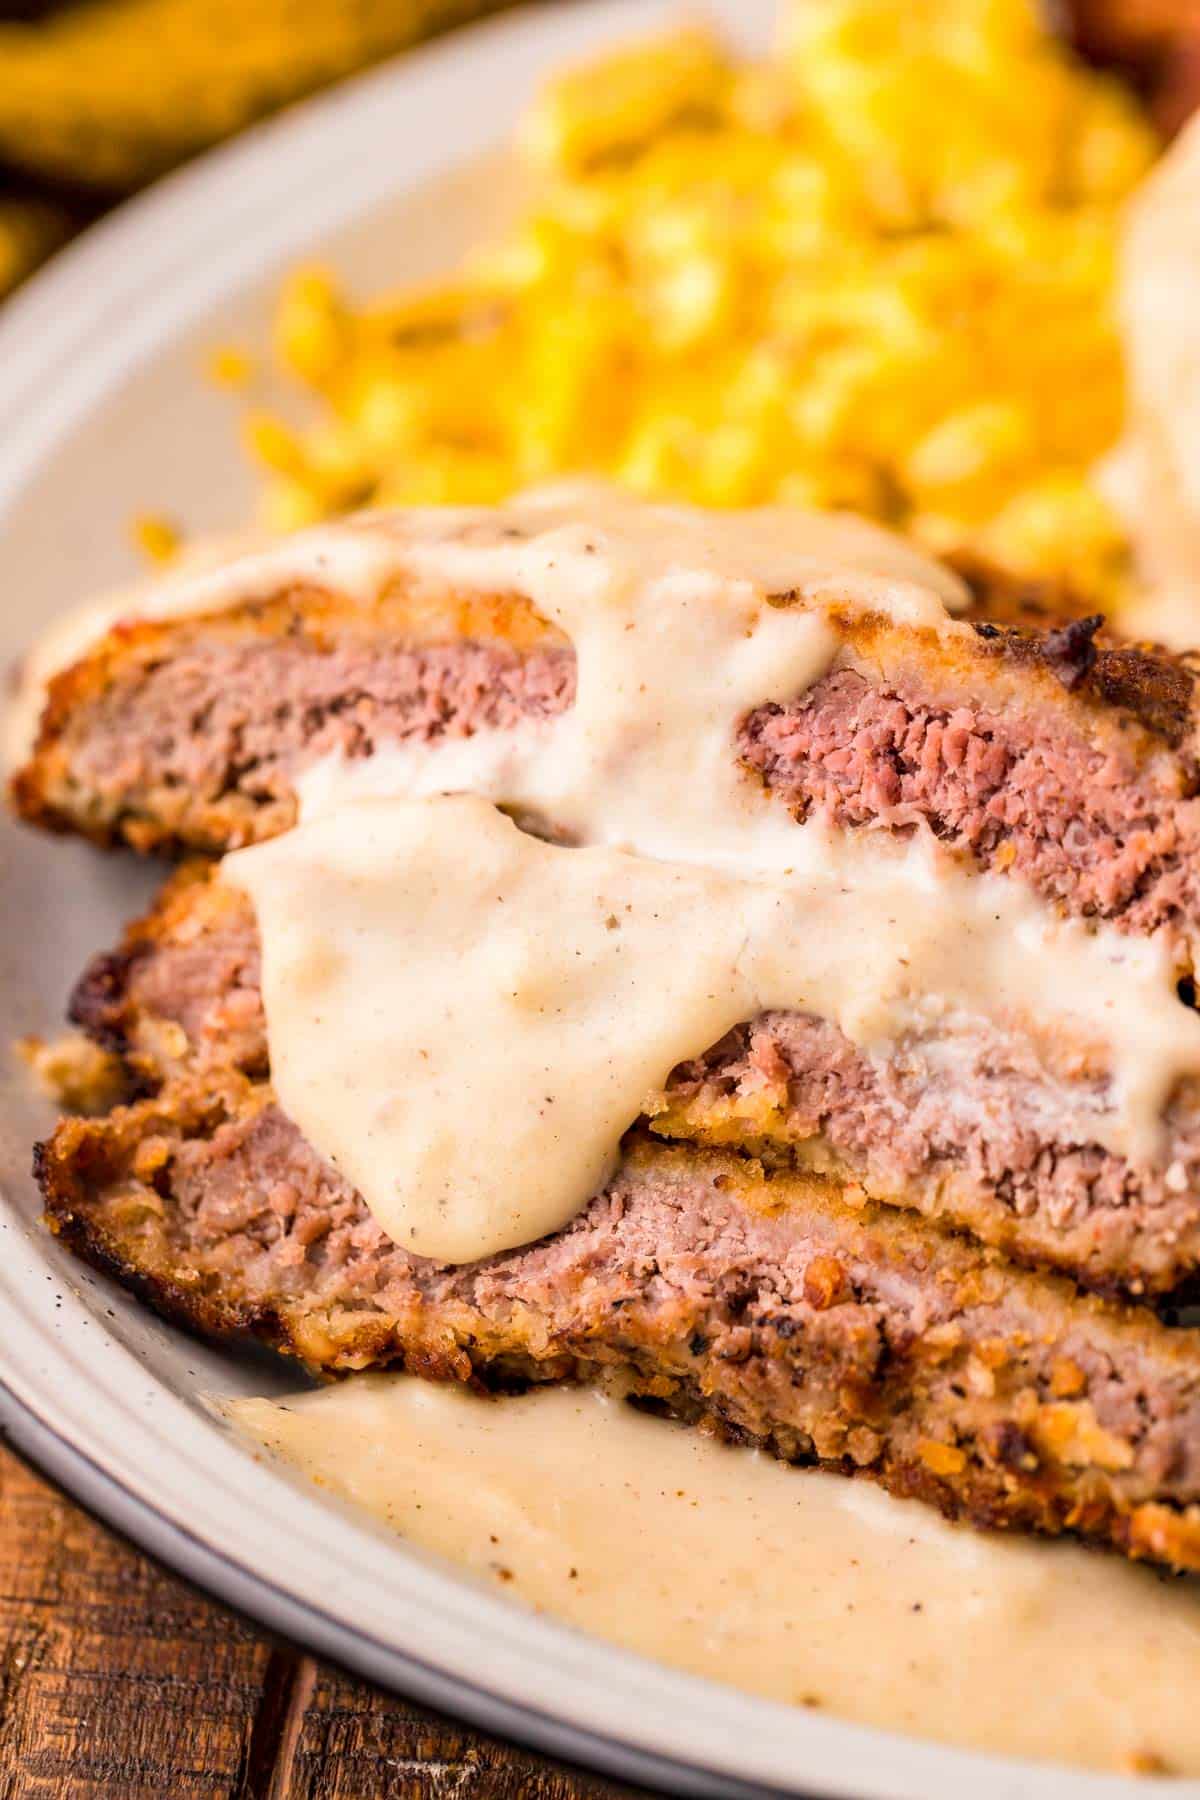 Sliced country fried steak on a plate topped with sawmill gravy.